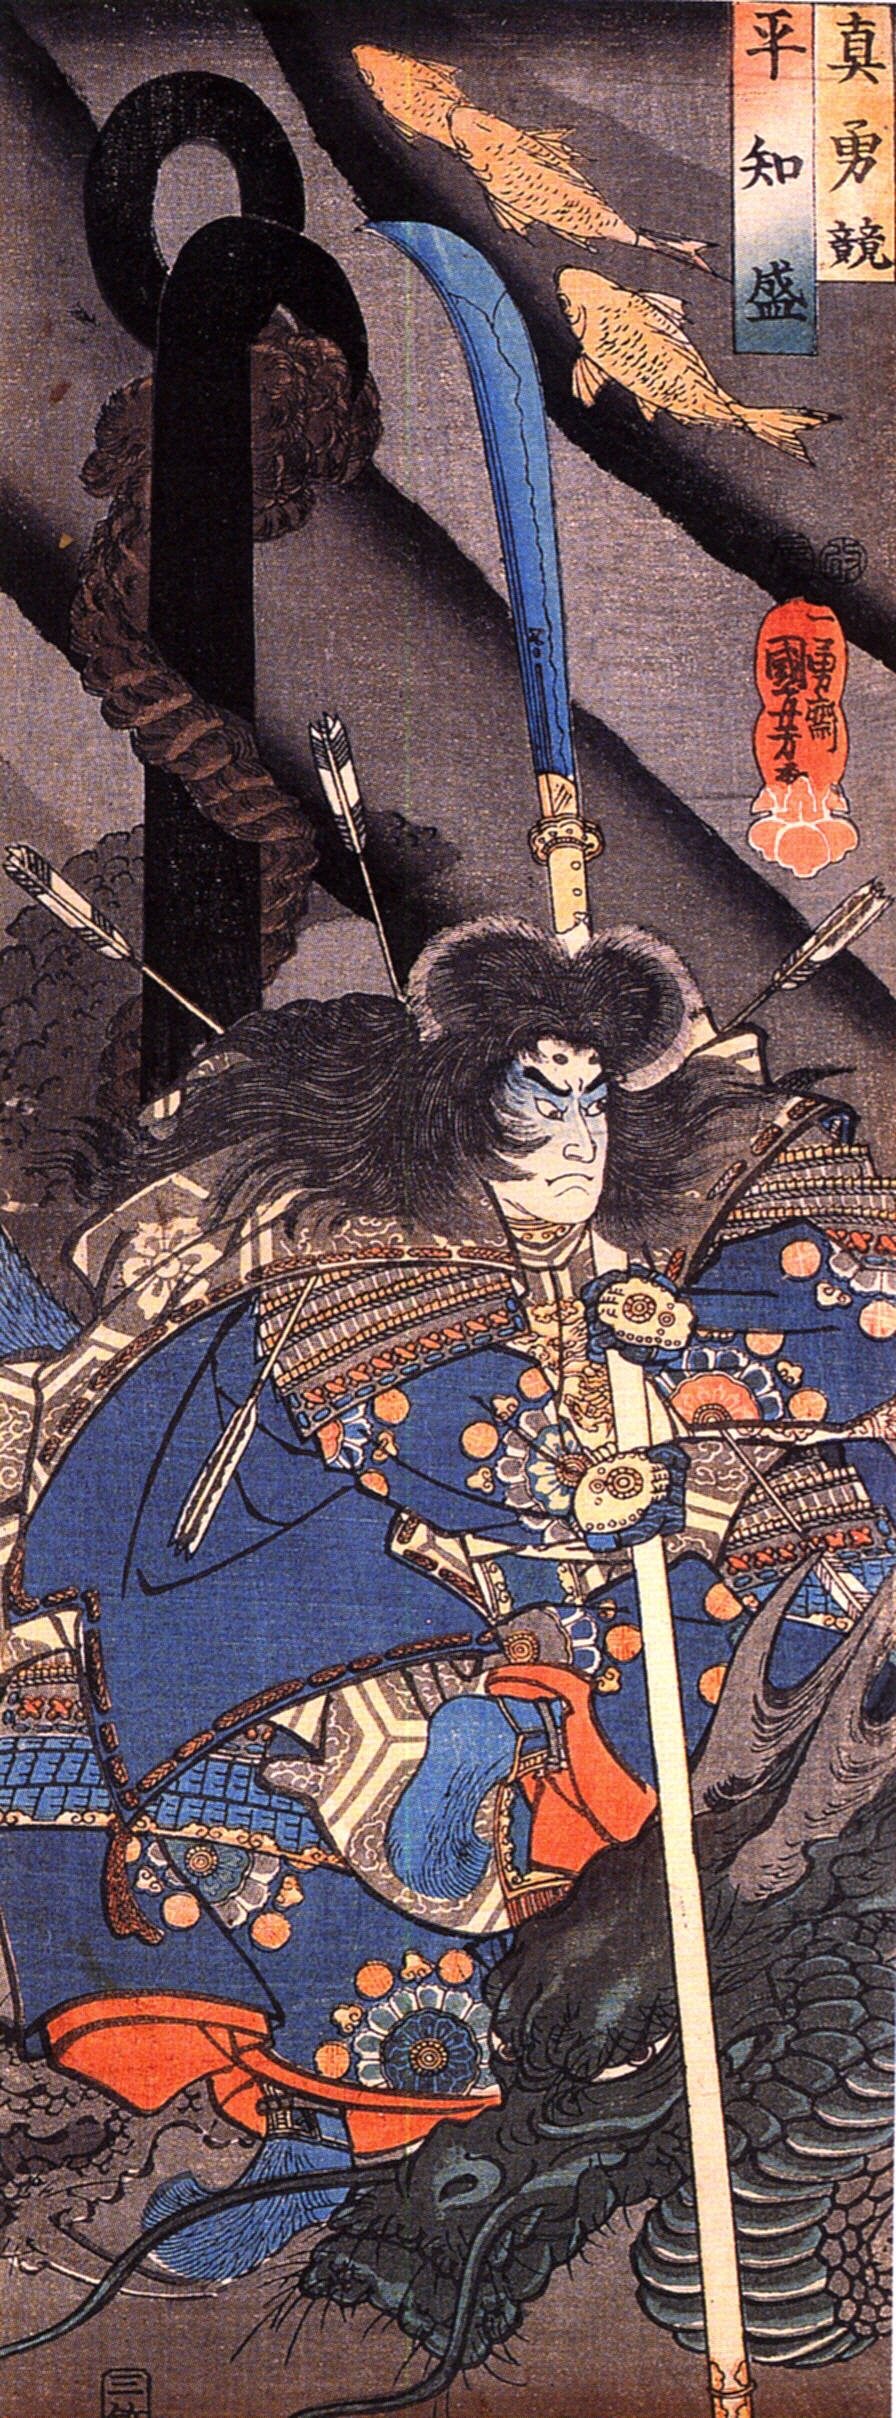 Tomomori commited suicide by attaching a big anchor to his waist and jumping into the sea. The reason for his suicidal act was his defeat by the Minamoto